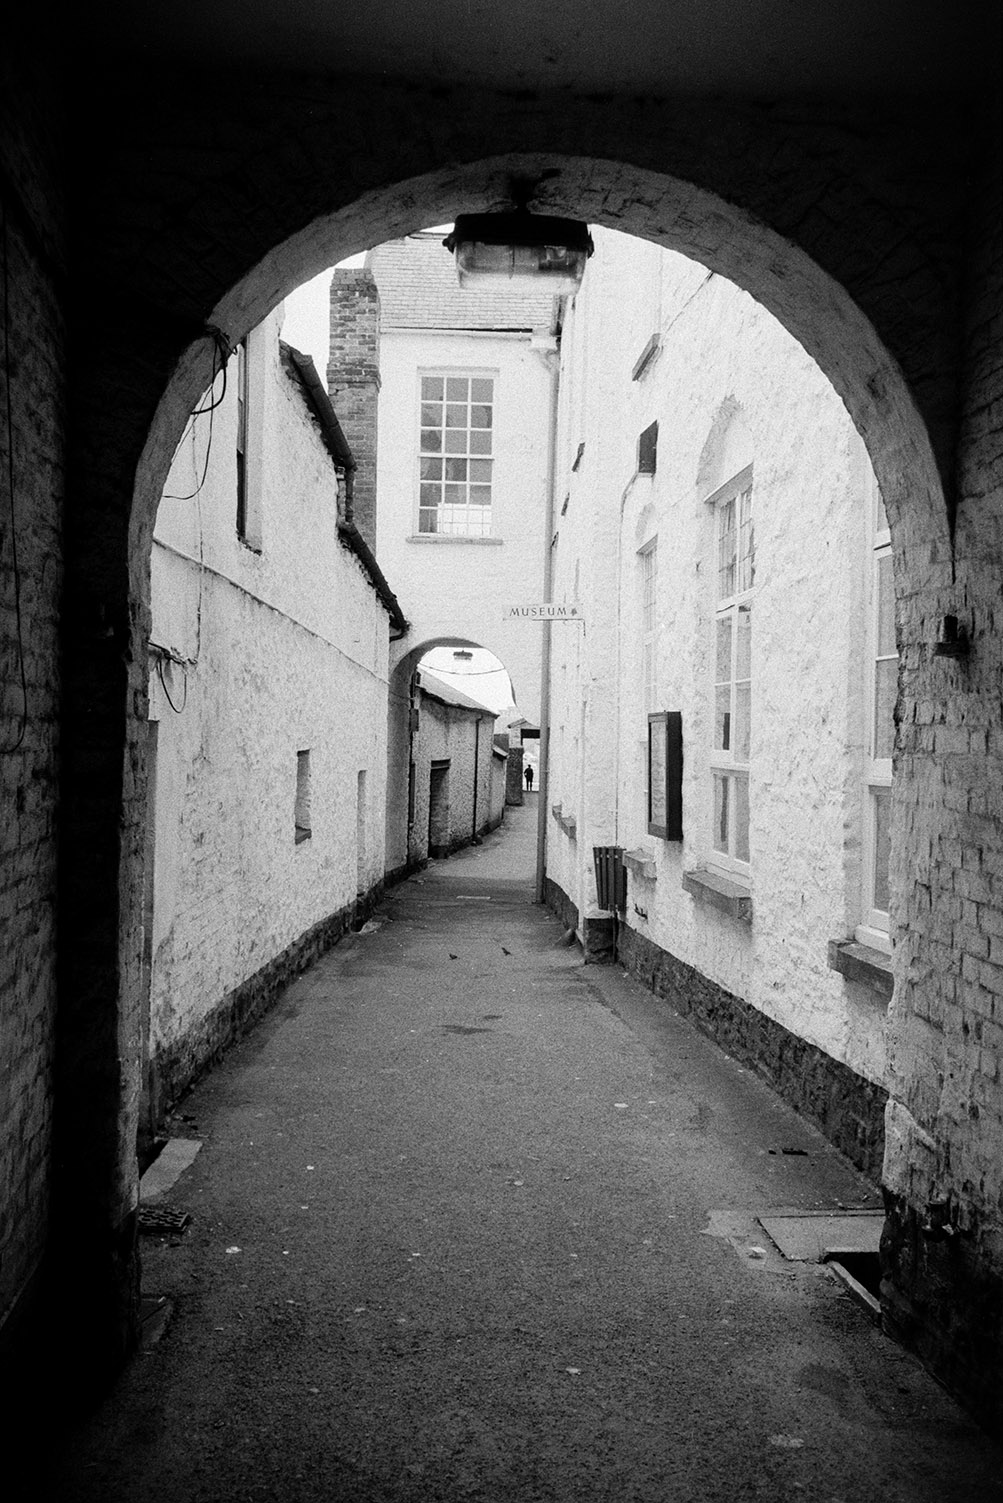 An archway leading down a narrow street in South Molton. A sign for the Museum is on the building.